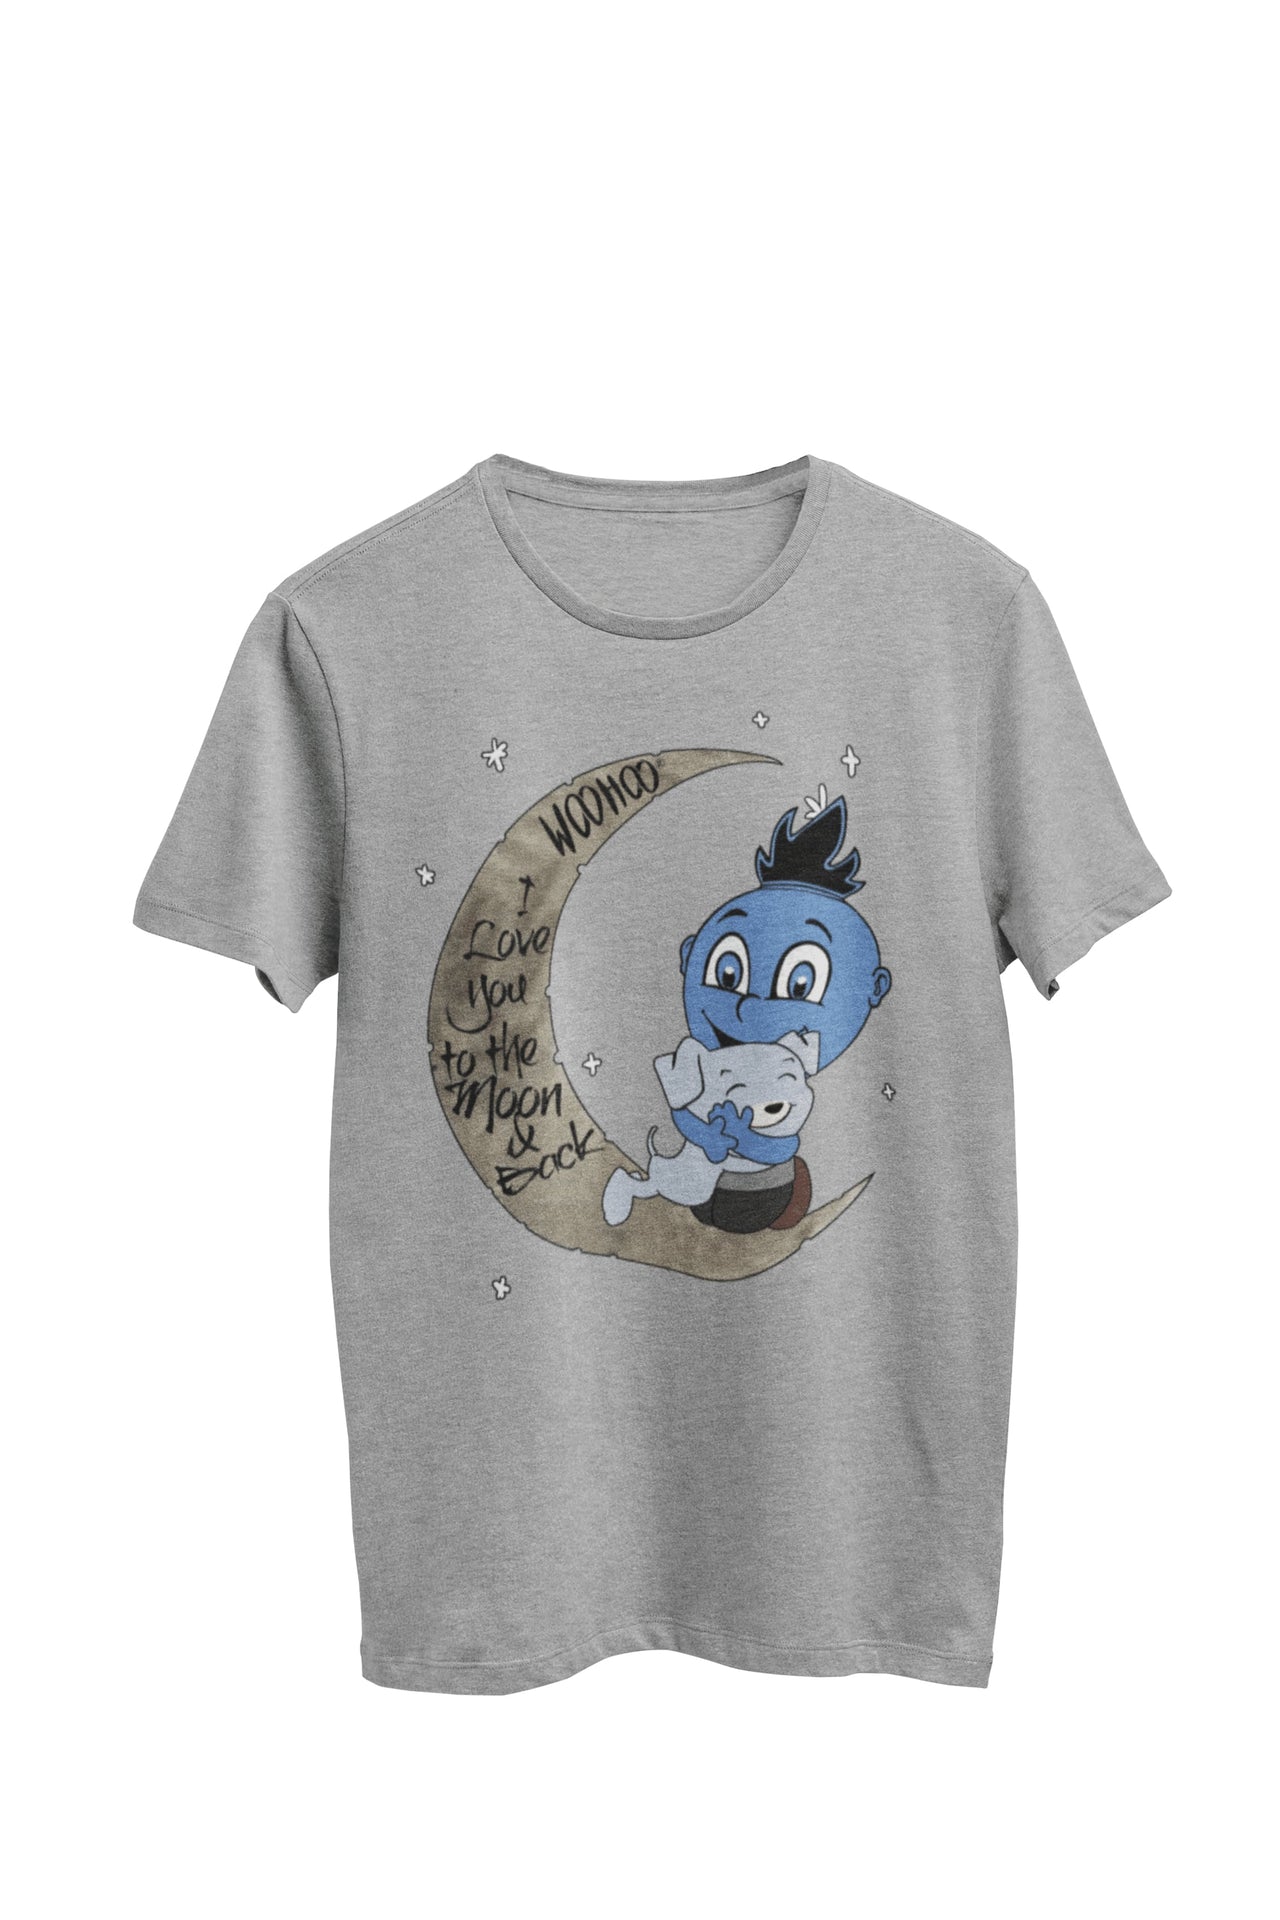 WooHooBerry and a lovable dog sharing a heartwarming hug, nestled within a crescent moon shape. The moon itself carries the sentiment 'WooHoo I love you to the moon and back.' The gray T-shirt elegantly harmonizes with the touching and affectionate atmosphere of the moment